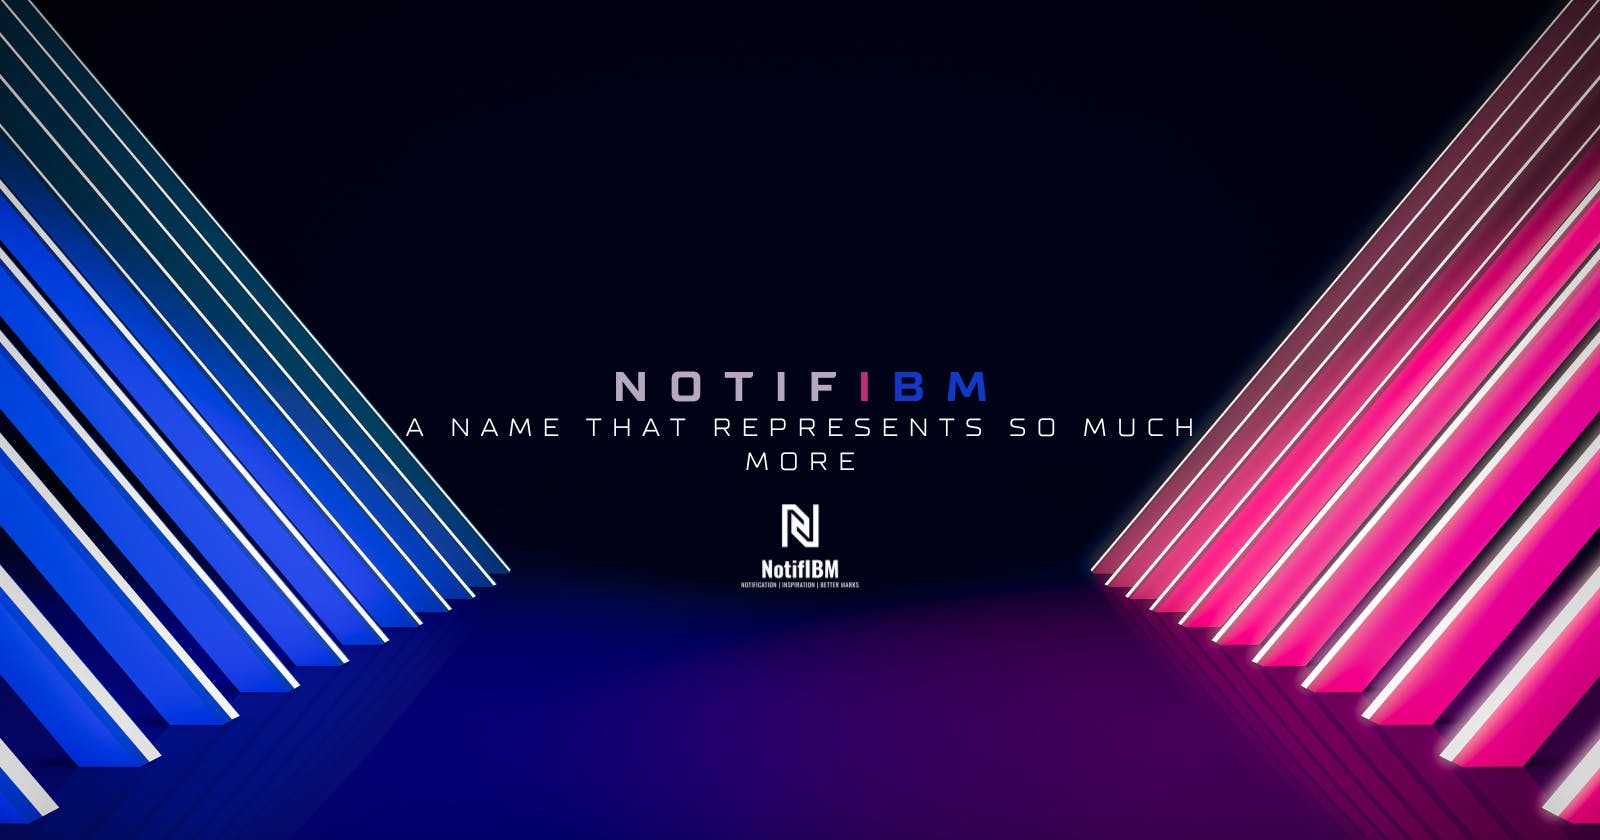 NotifIBM: A Name That Represents So Much More